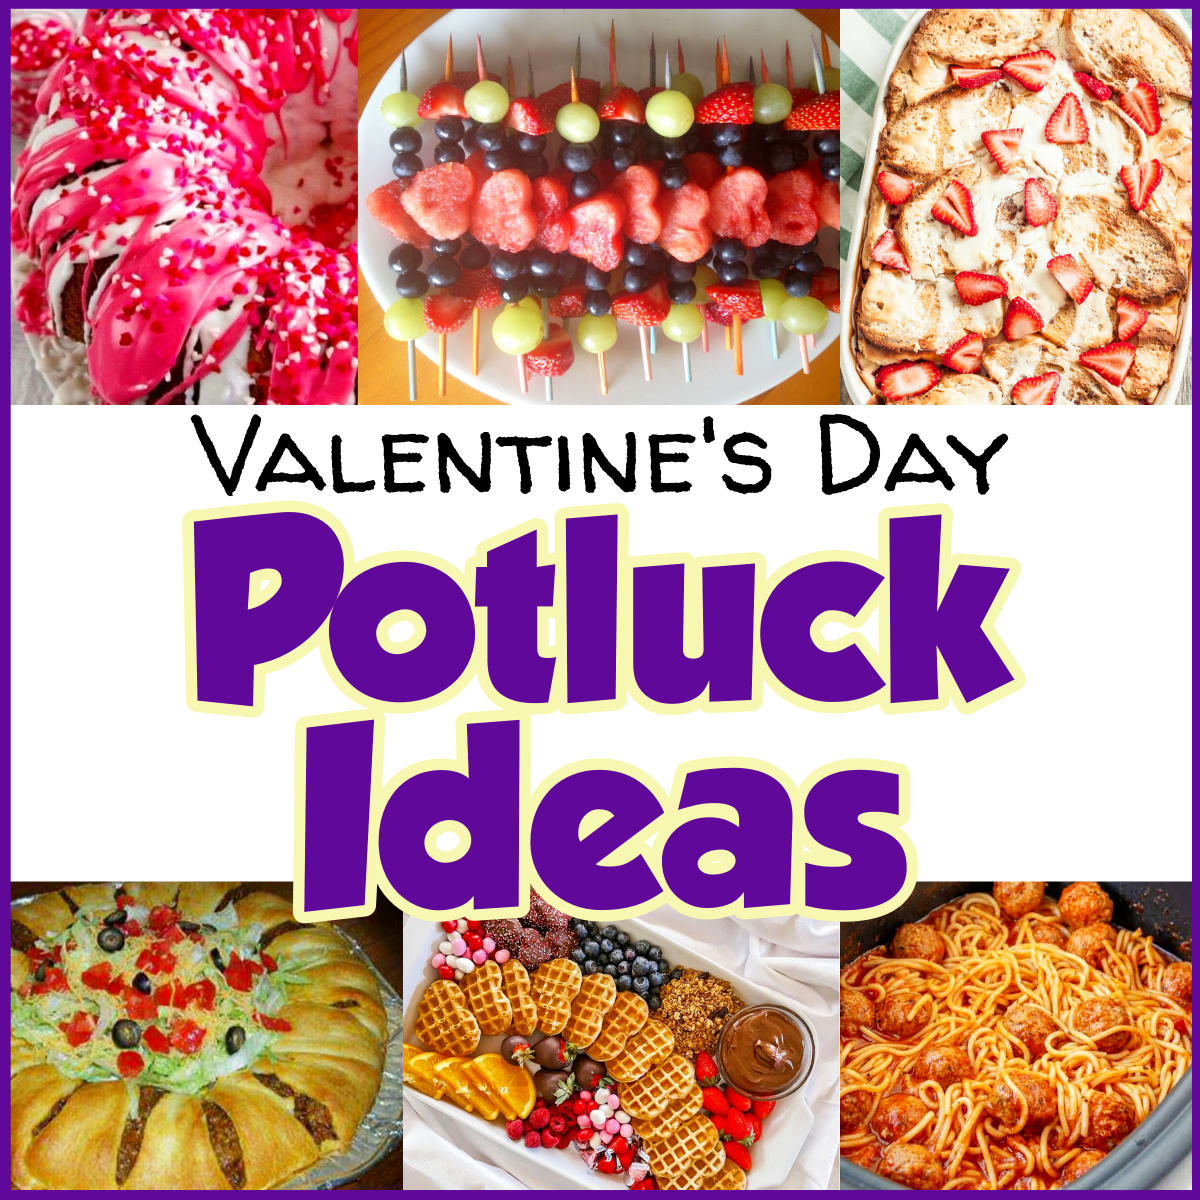 Valentine Potluck Ideas for Work or any Potluck Party Crowd on Valentine's Day. Main dhshes, covered dishes, breakfast potluck and potluck desserts for your Potluck planning sign up sheet